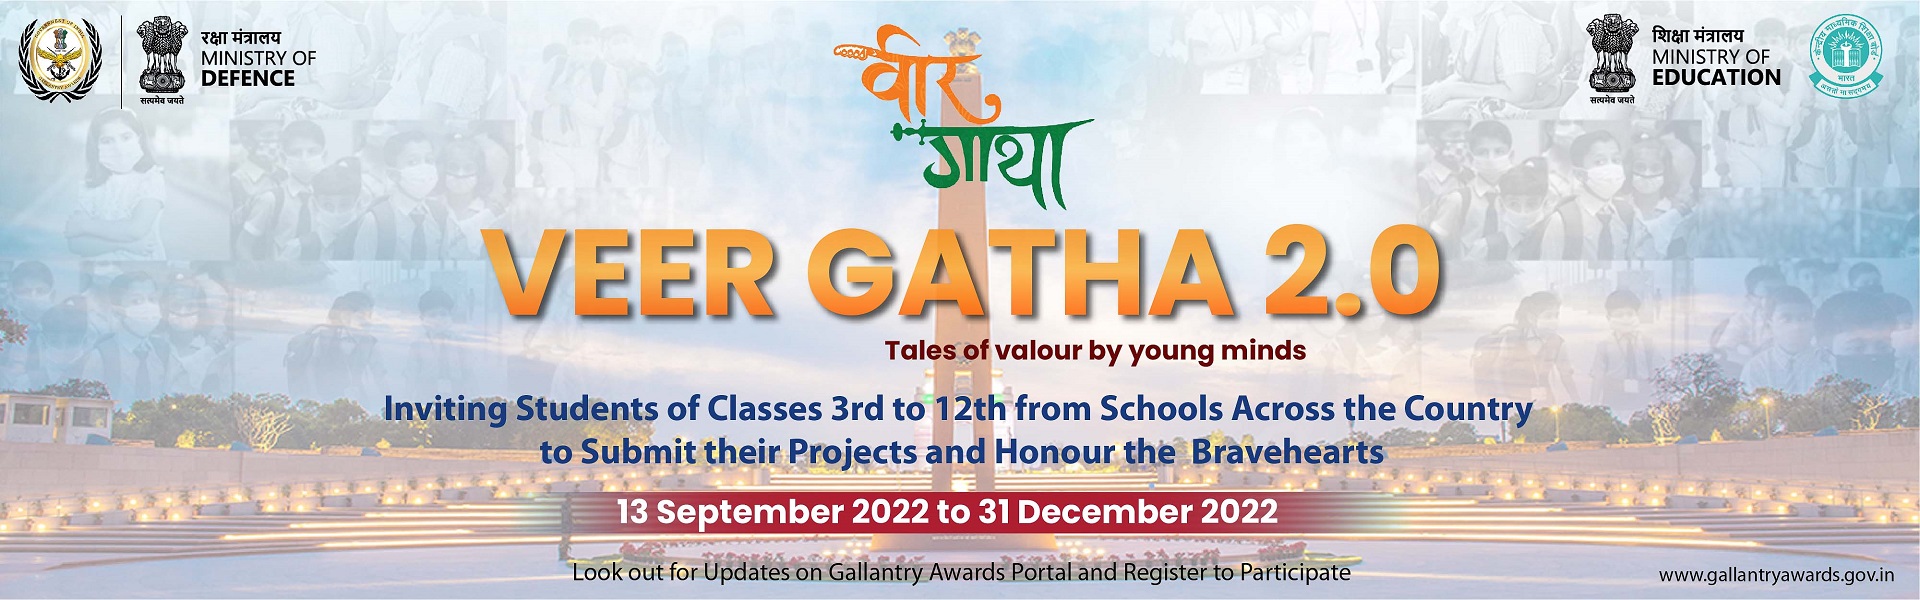 Veer Gatha 2.0, Tales of valour by young minds